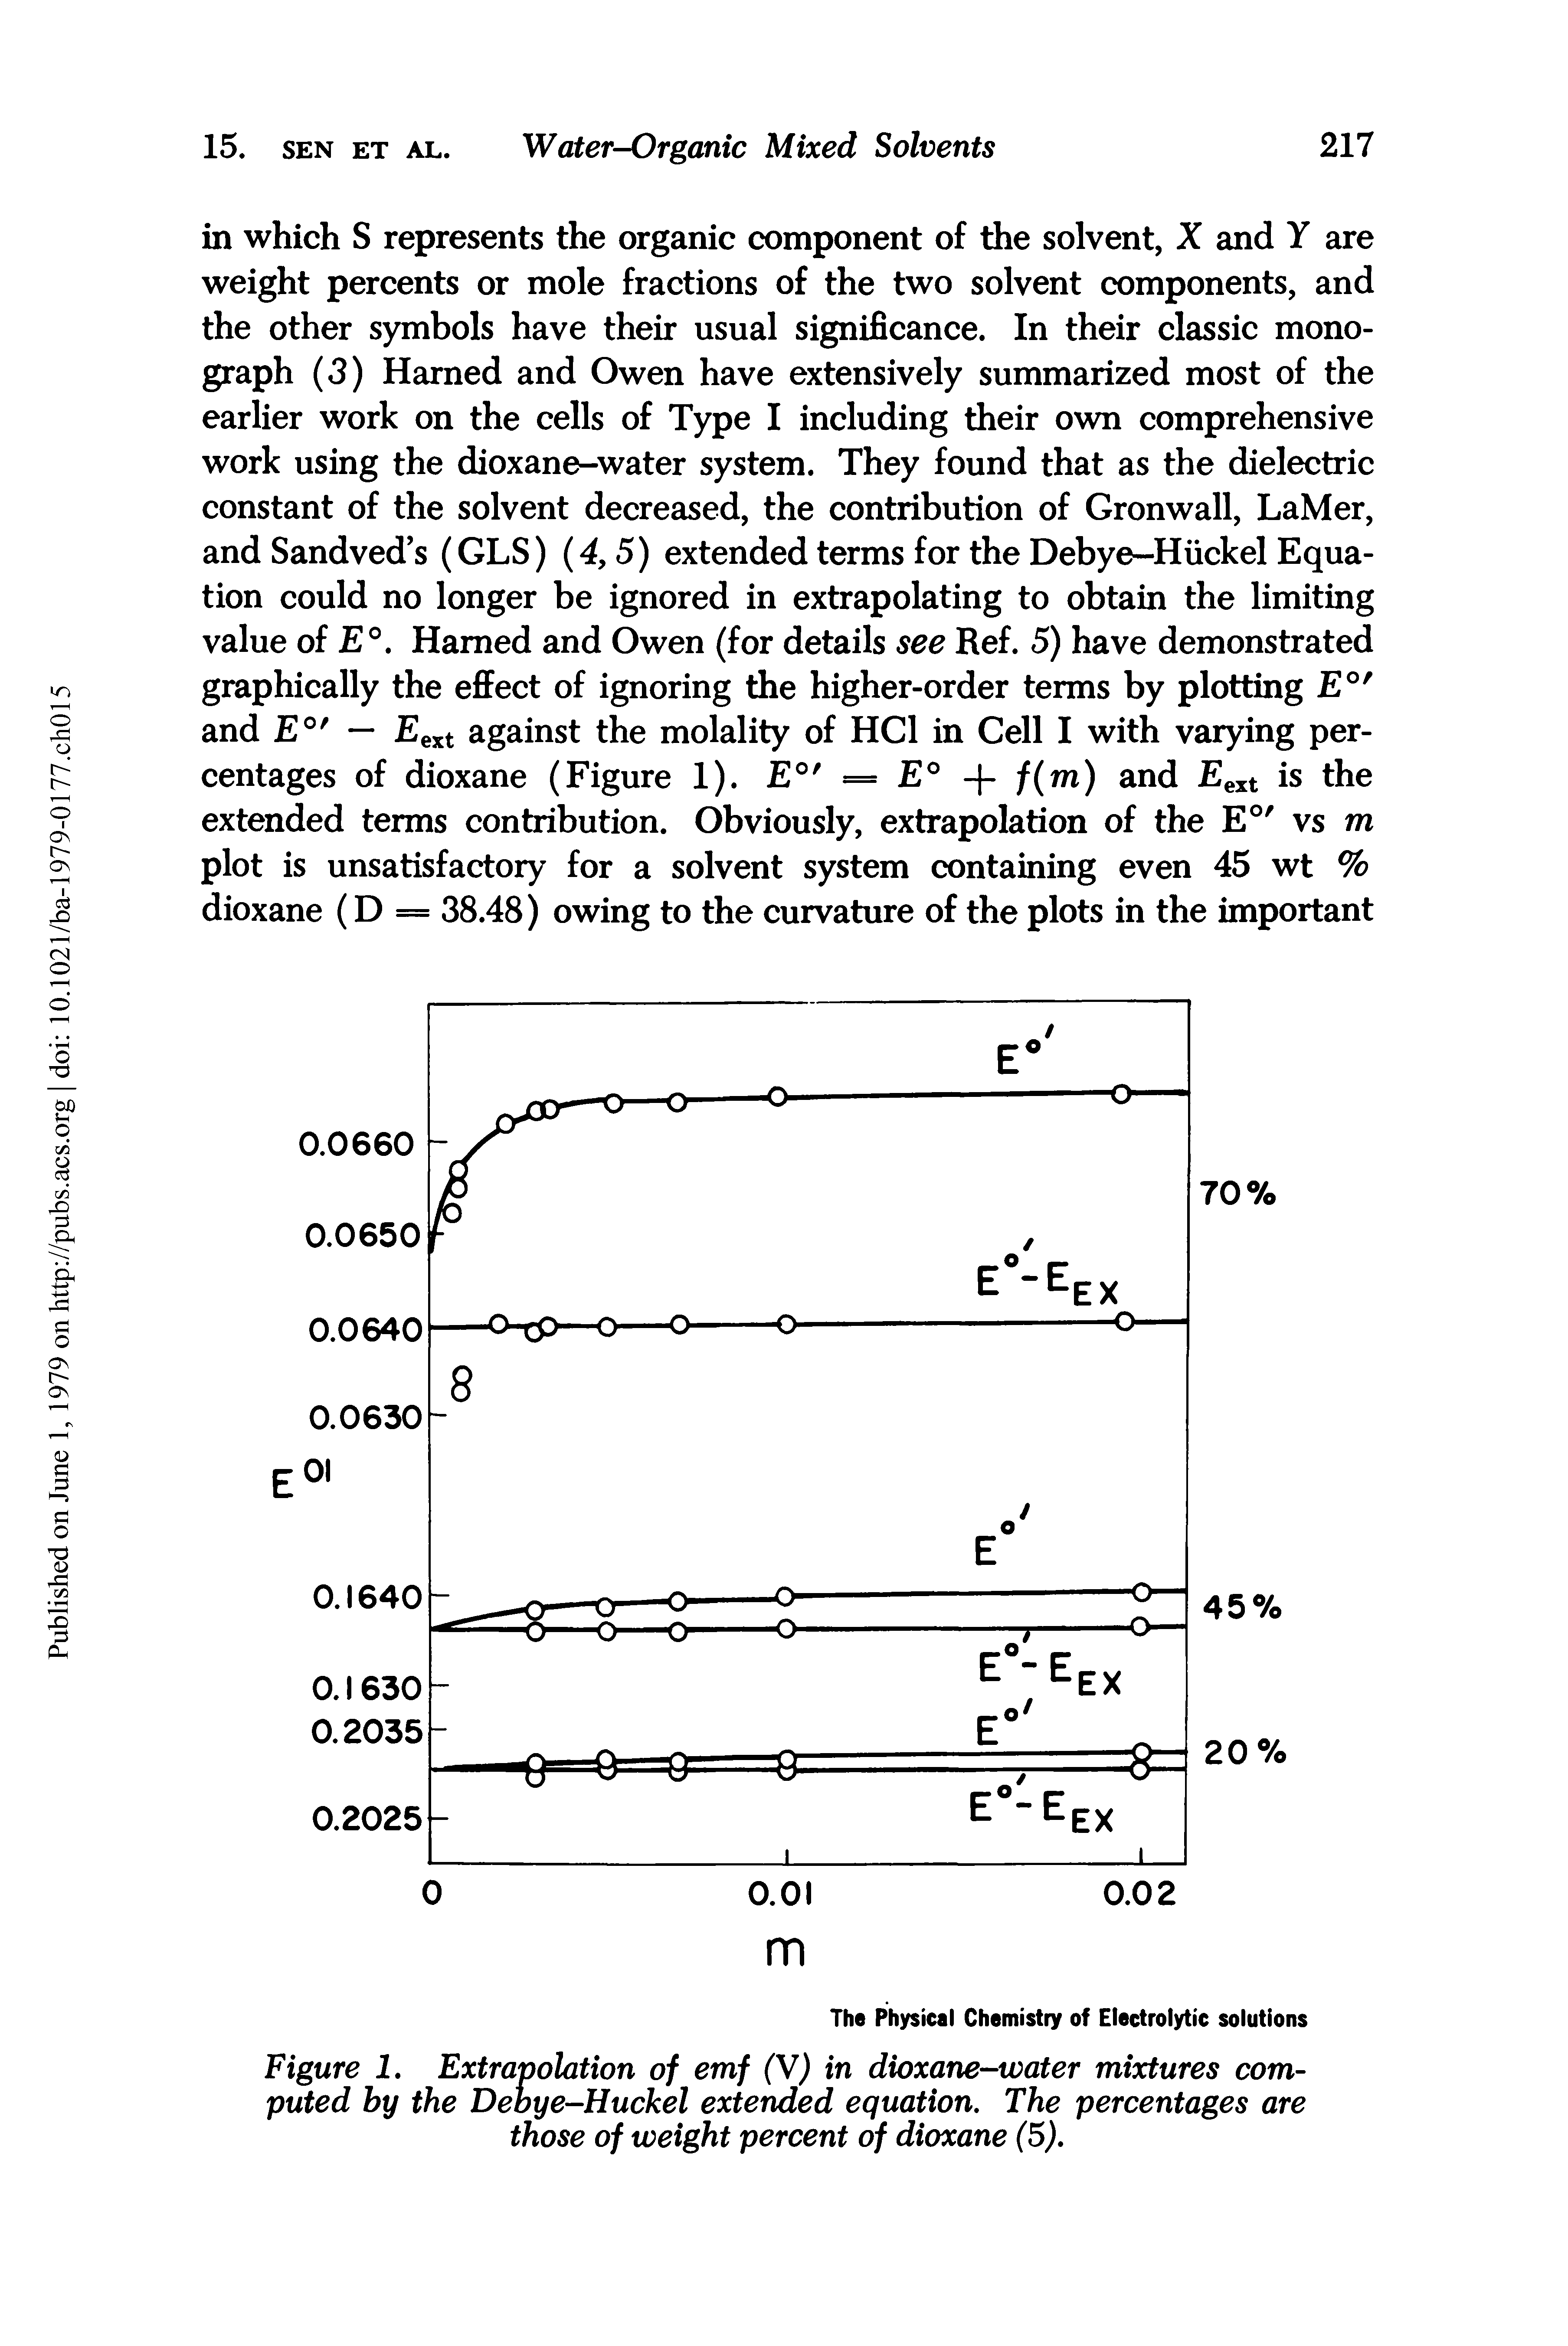 Figure 1. Extrapolation of emf (V) in dioxane-water mixtures computed by the Debye-Huckel extended equation. The percentages are those of weight percent of dioxane (5).